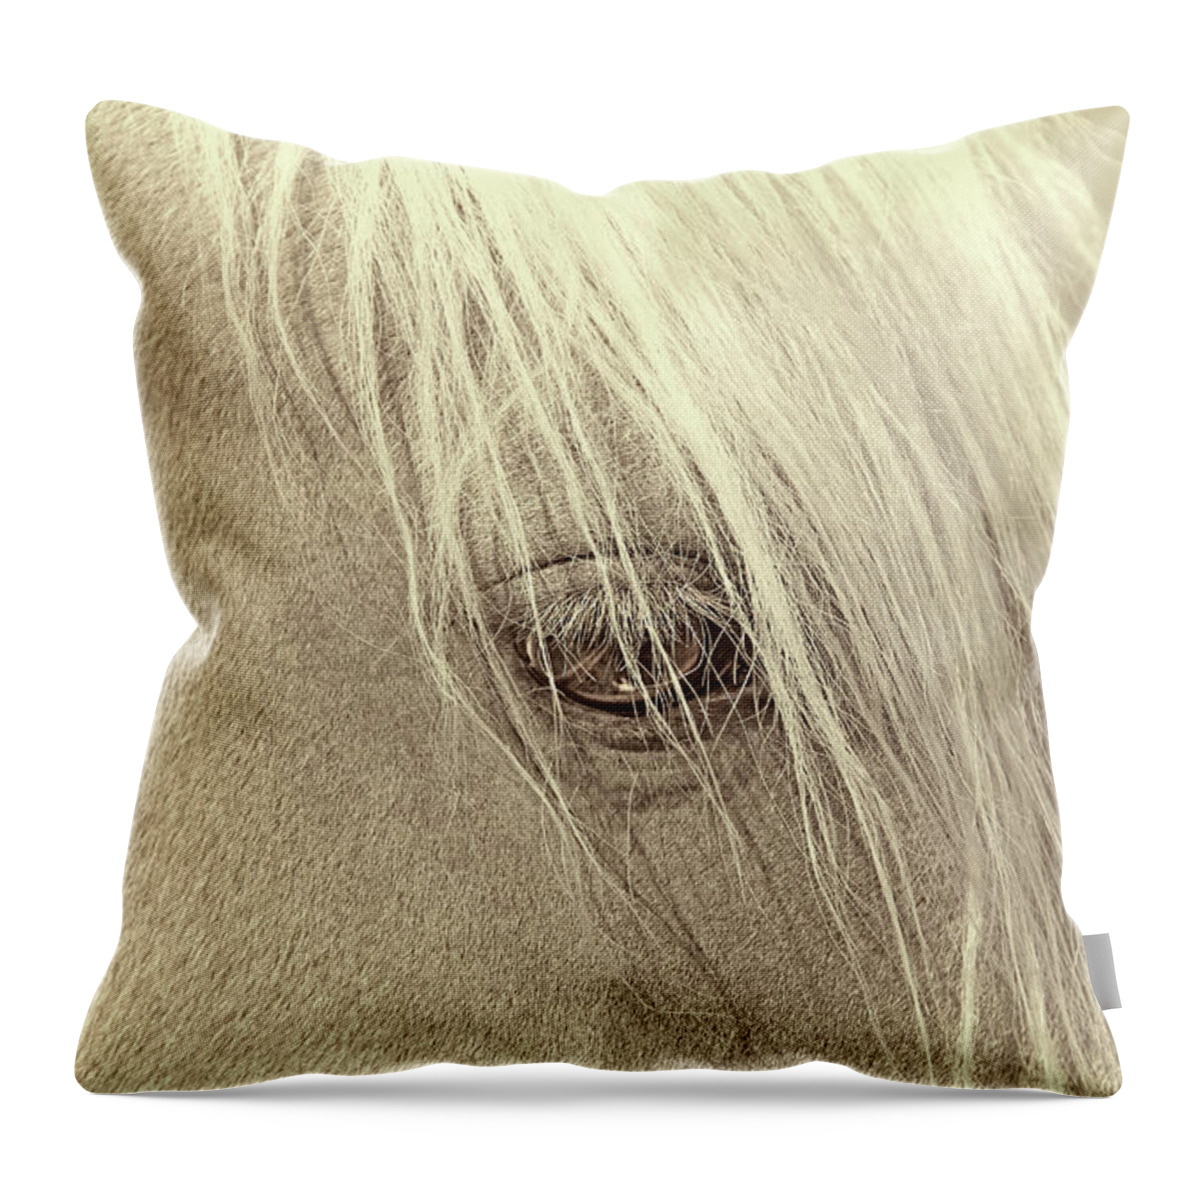 Horse Throw Pillow featuring the photograph Horse's Eye Portrait Beige by Jennie Marie Schell